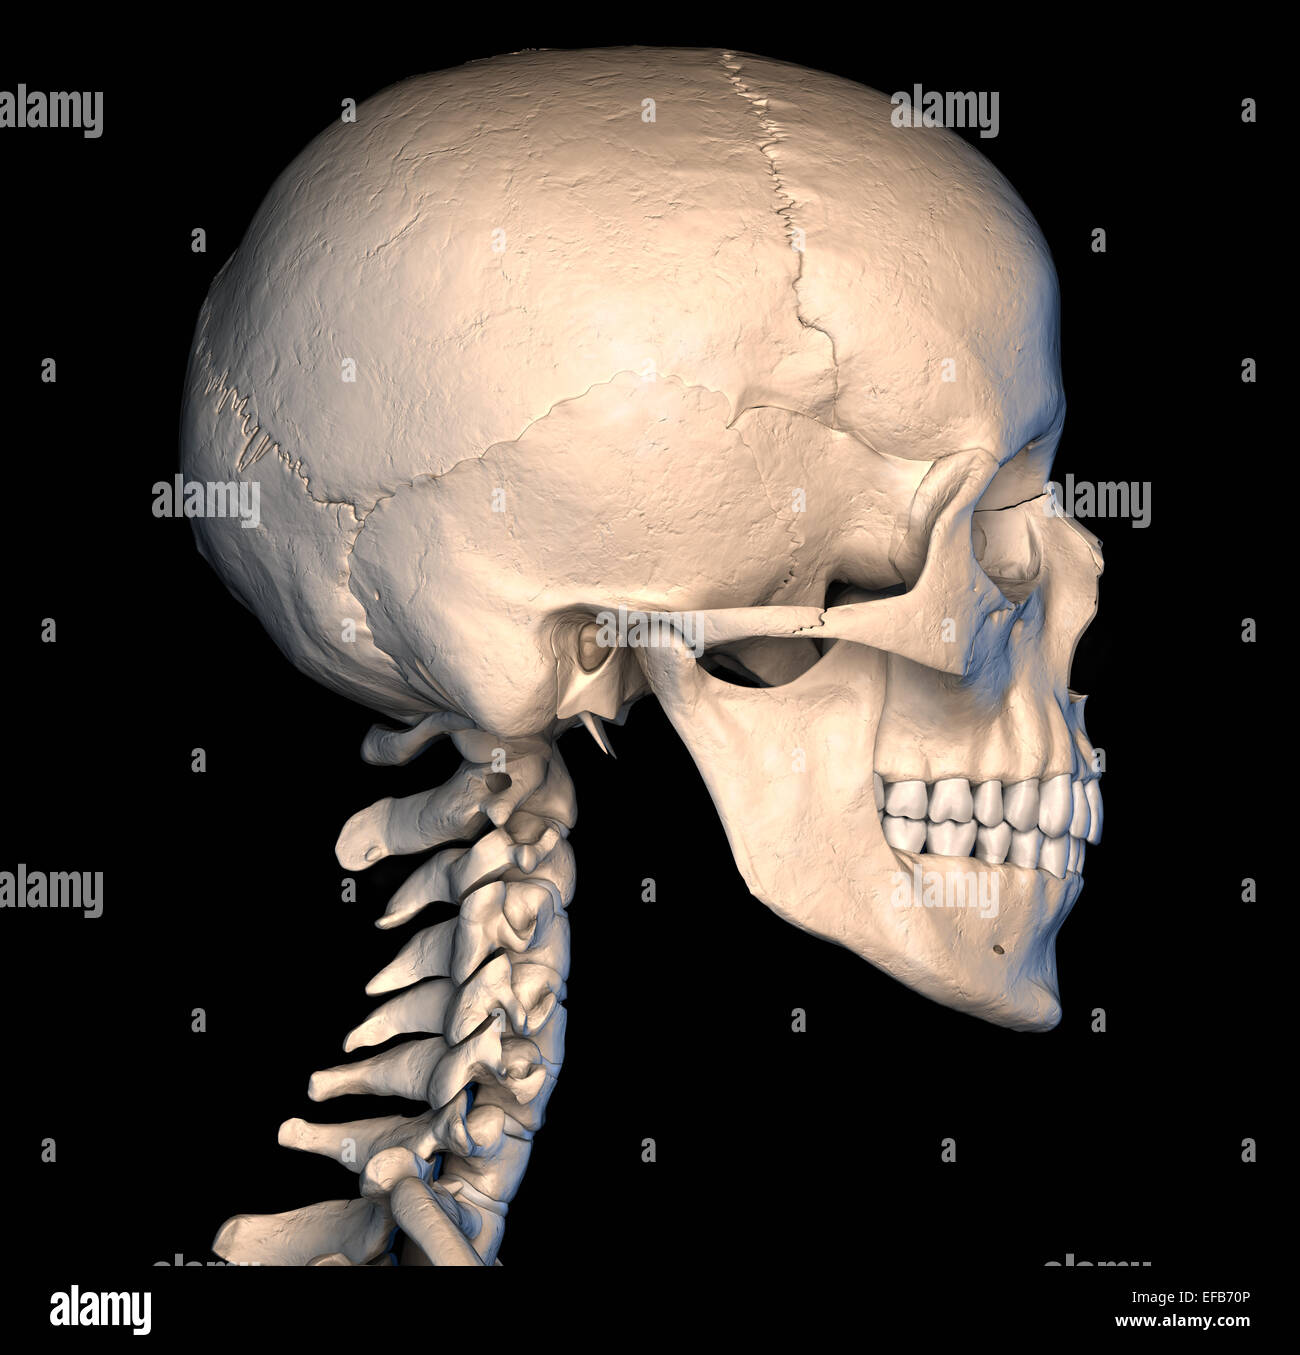 Very detailed and scientifically correct human skull. side view, on black background. Anatomy image. Stock Photo